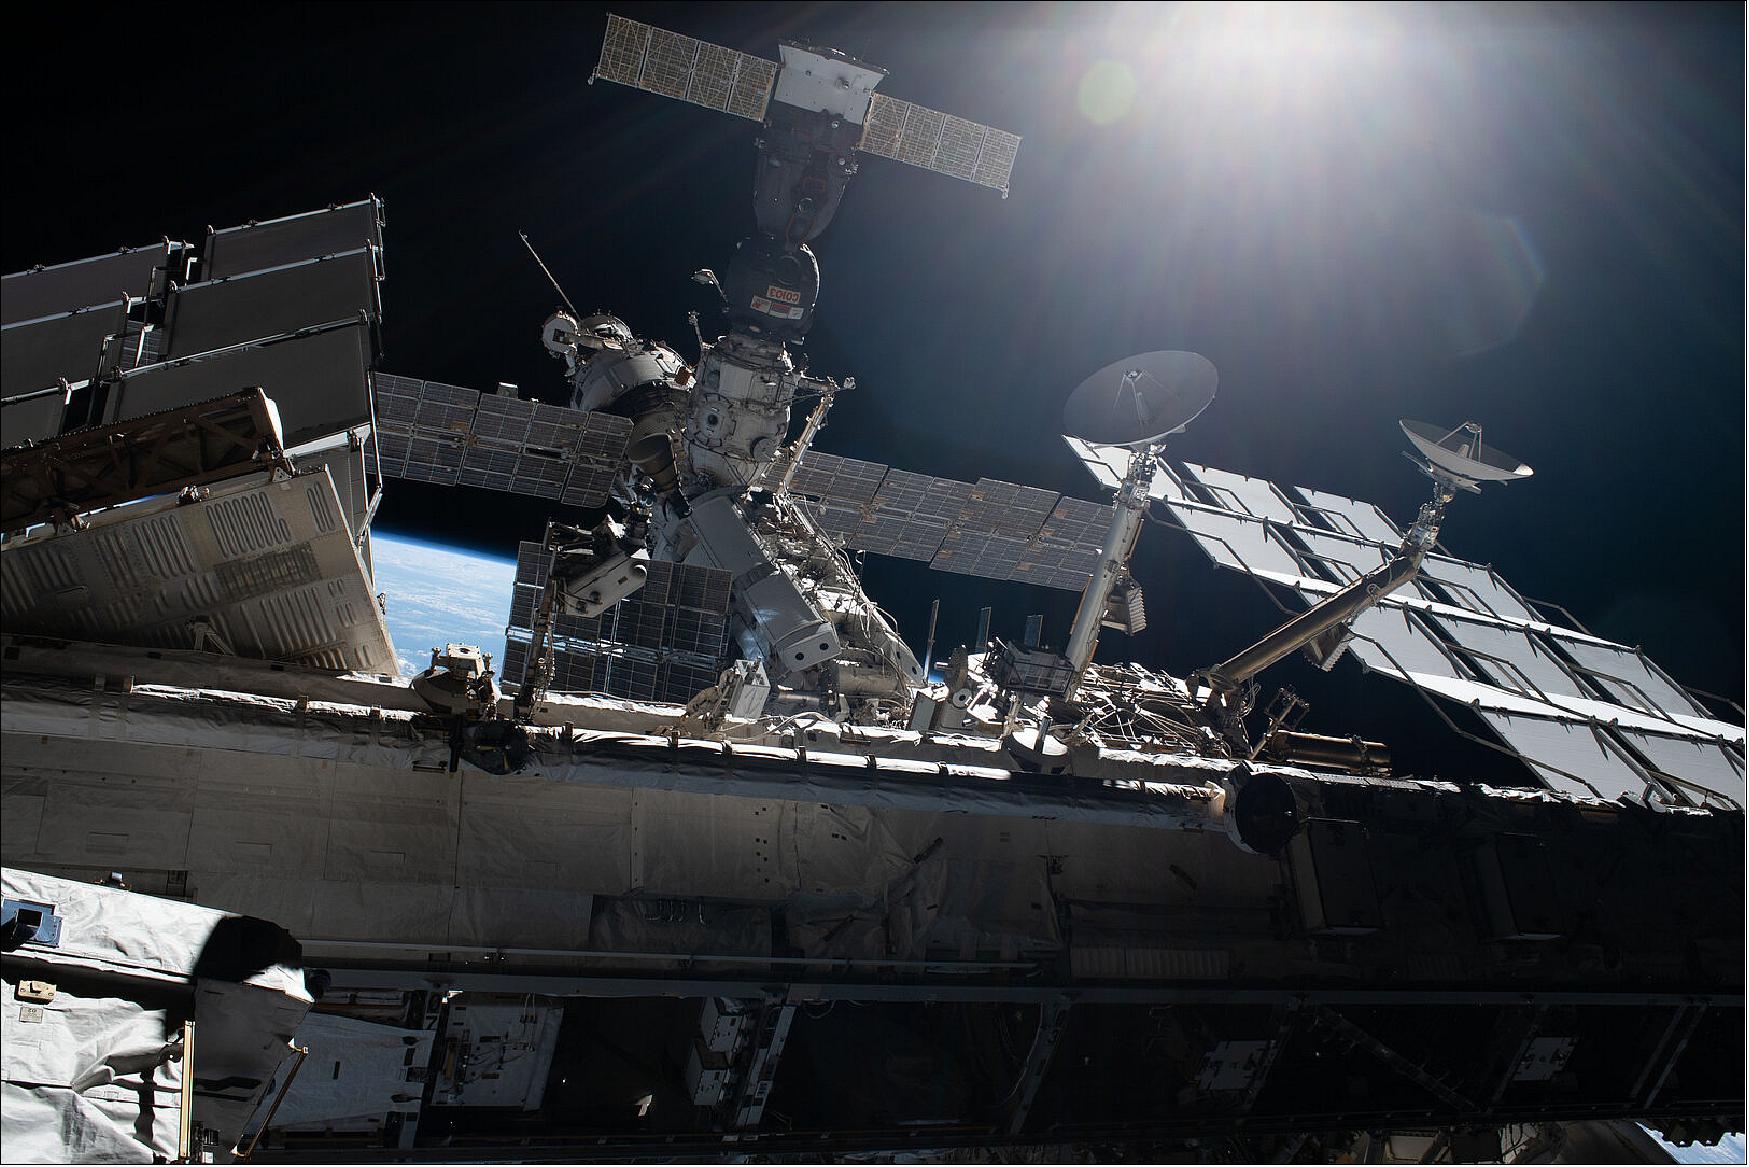 Figure 115: International Space Station with Soyuz. This image taken by ESA astronaut Luca Parmitano from outside the International Space Station on the second spacewalk to service the cosmic ray detecting Alpha Magnetic Spectrometer (AMS-02) on 22 November 2019. The Soyuz MS-13 spacecraft that bought Luca, NASA astronaut Drew Morgan and Roscosmos commander Alexander Skvortsov to space is visible docked to the Zvezda service module of the International Space Station. Due to the AMS worksite being difficult to reach on top of the Station's S3 Truss structure between a pair of solar arrays and radiators, Luca travelled to and from the site on the end of the robotic arm operated by NASA astronaut Jessica Meir from inside the Station (image credit: ESA–Luca Parmitano, CC BY-SA 3.0 IGO)